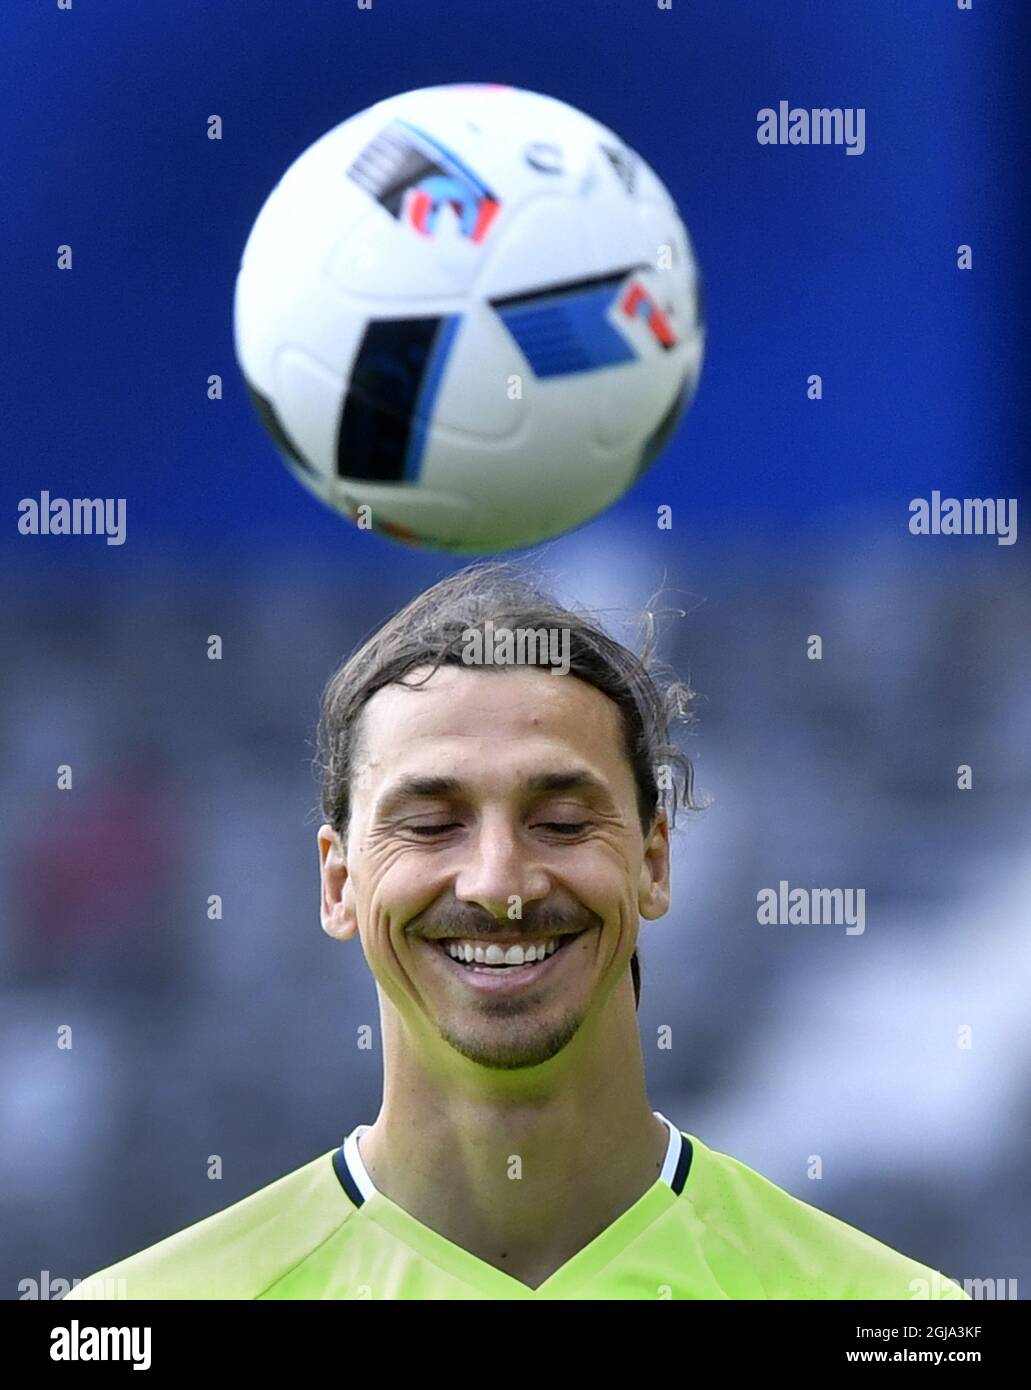 FILE 2016-06-16 Swedish soccer player Zlatan Ibrahimovic smiles during a training session in Toulouse during the UEFA Euro 2016, on June 16, 2016. Zlatan Ibrahimovic said on June 30, 2016 that he is joining Manchester United. Photo: Anders Wiklund / TT / Kod 10040  Stock Photo